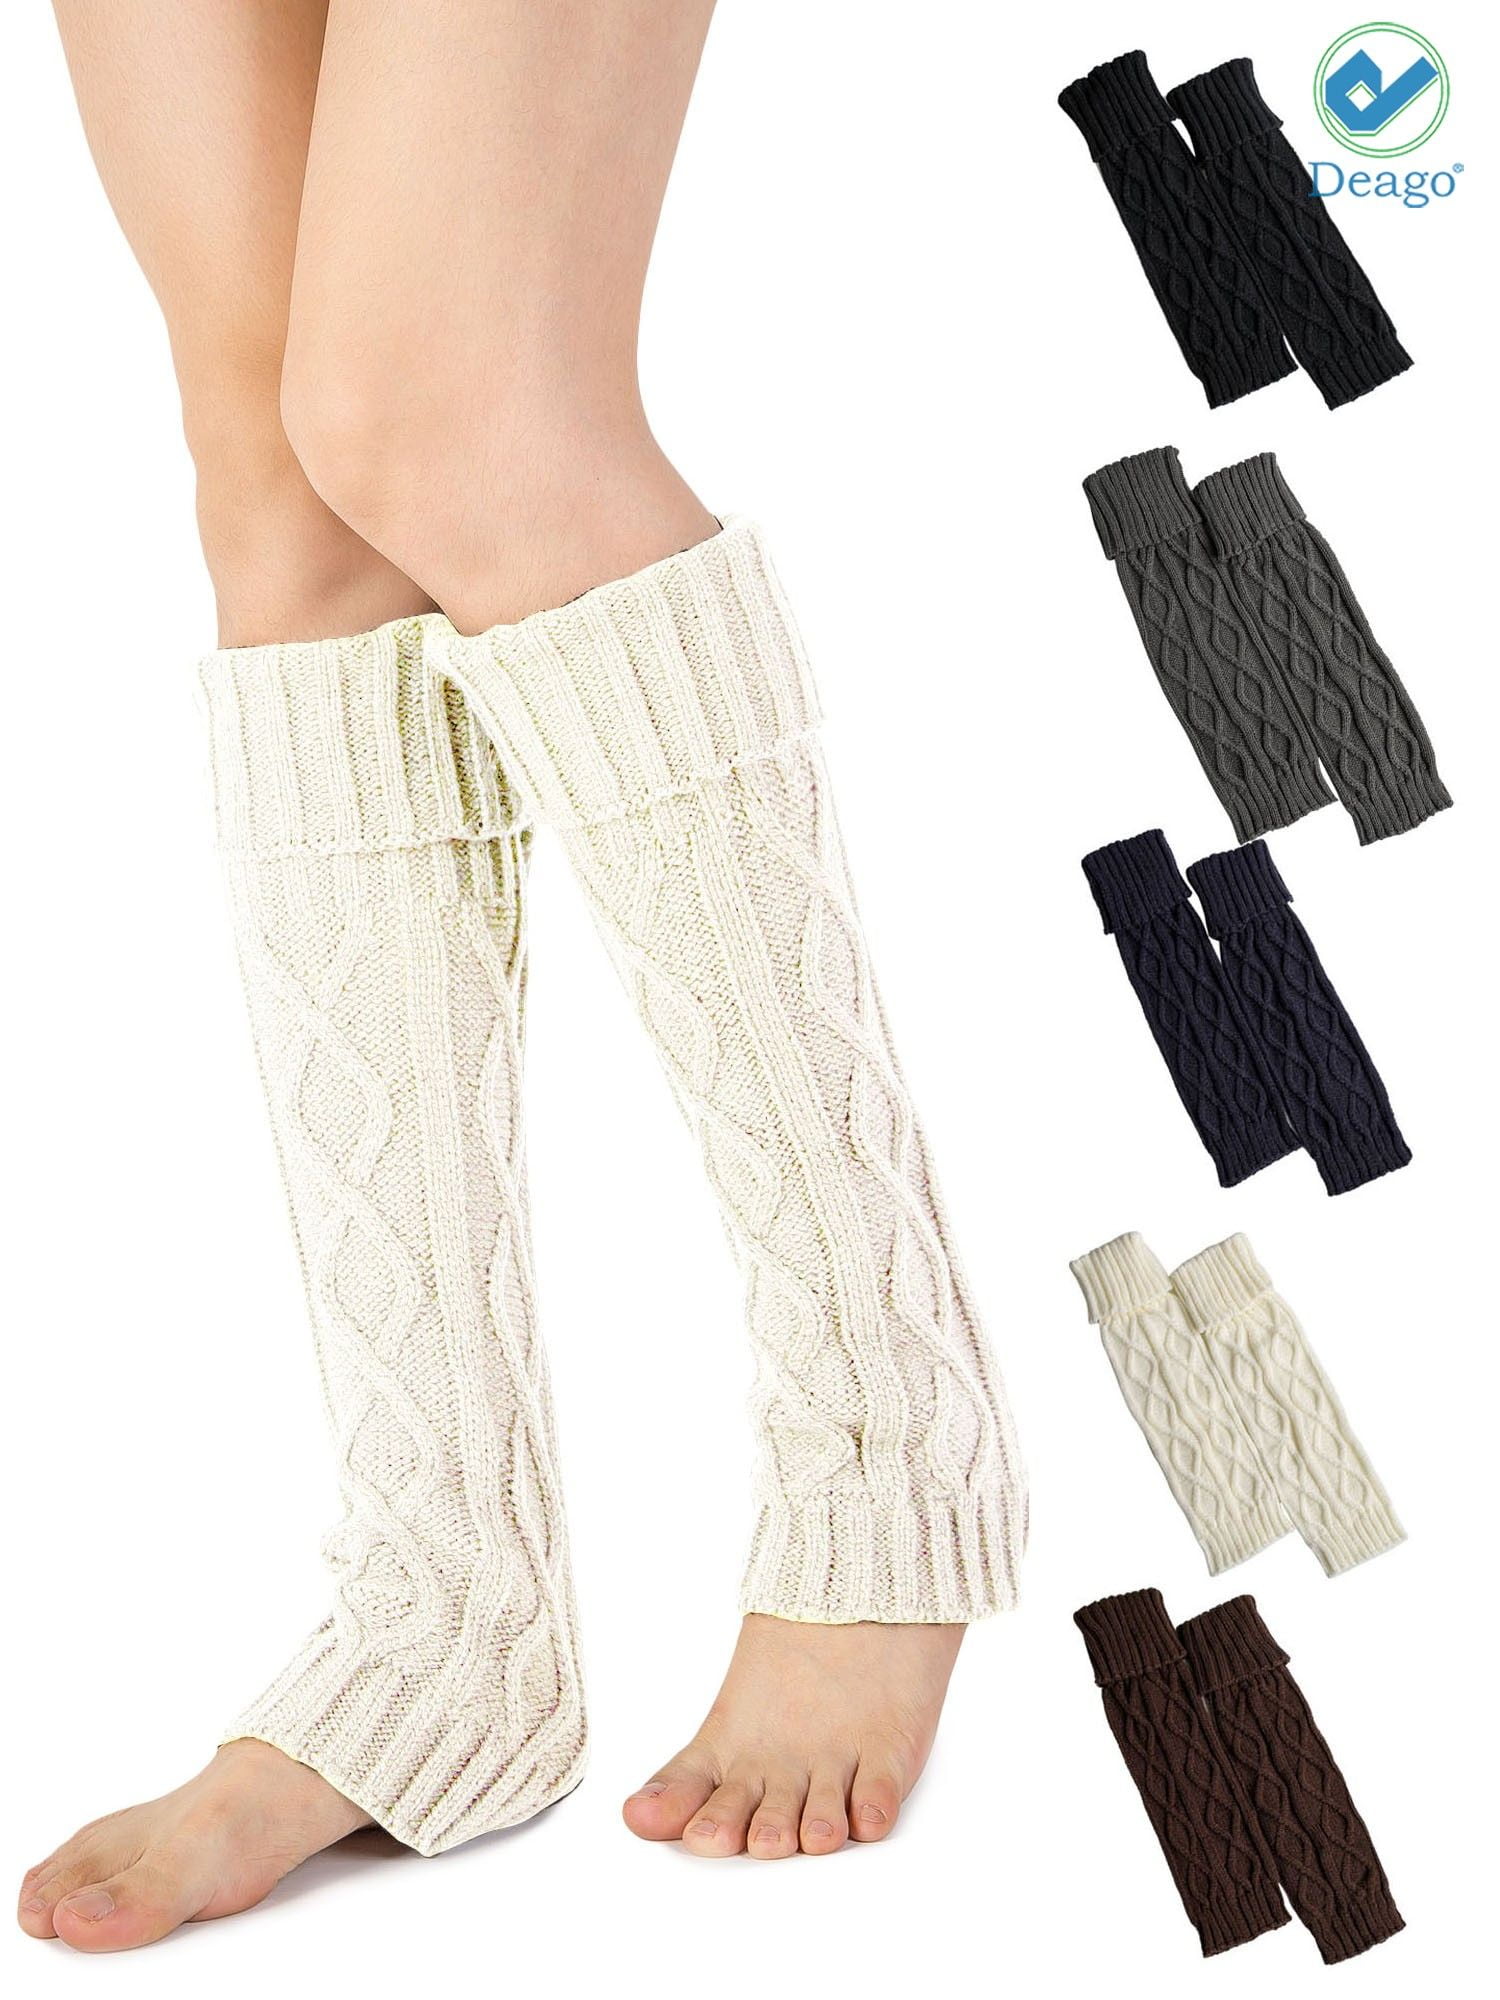 1 Pair Winter Warm Knitted Leg Warmers Knee High Cable Boot Cuffs Knit Socks Ankle Knee Warmers for Women Girls 